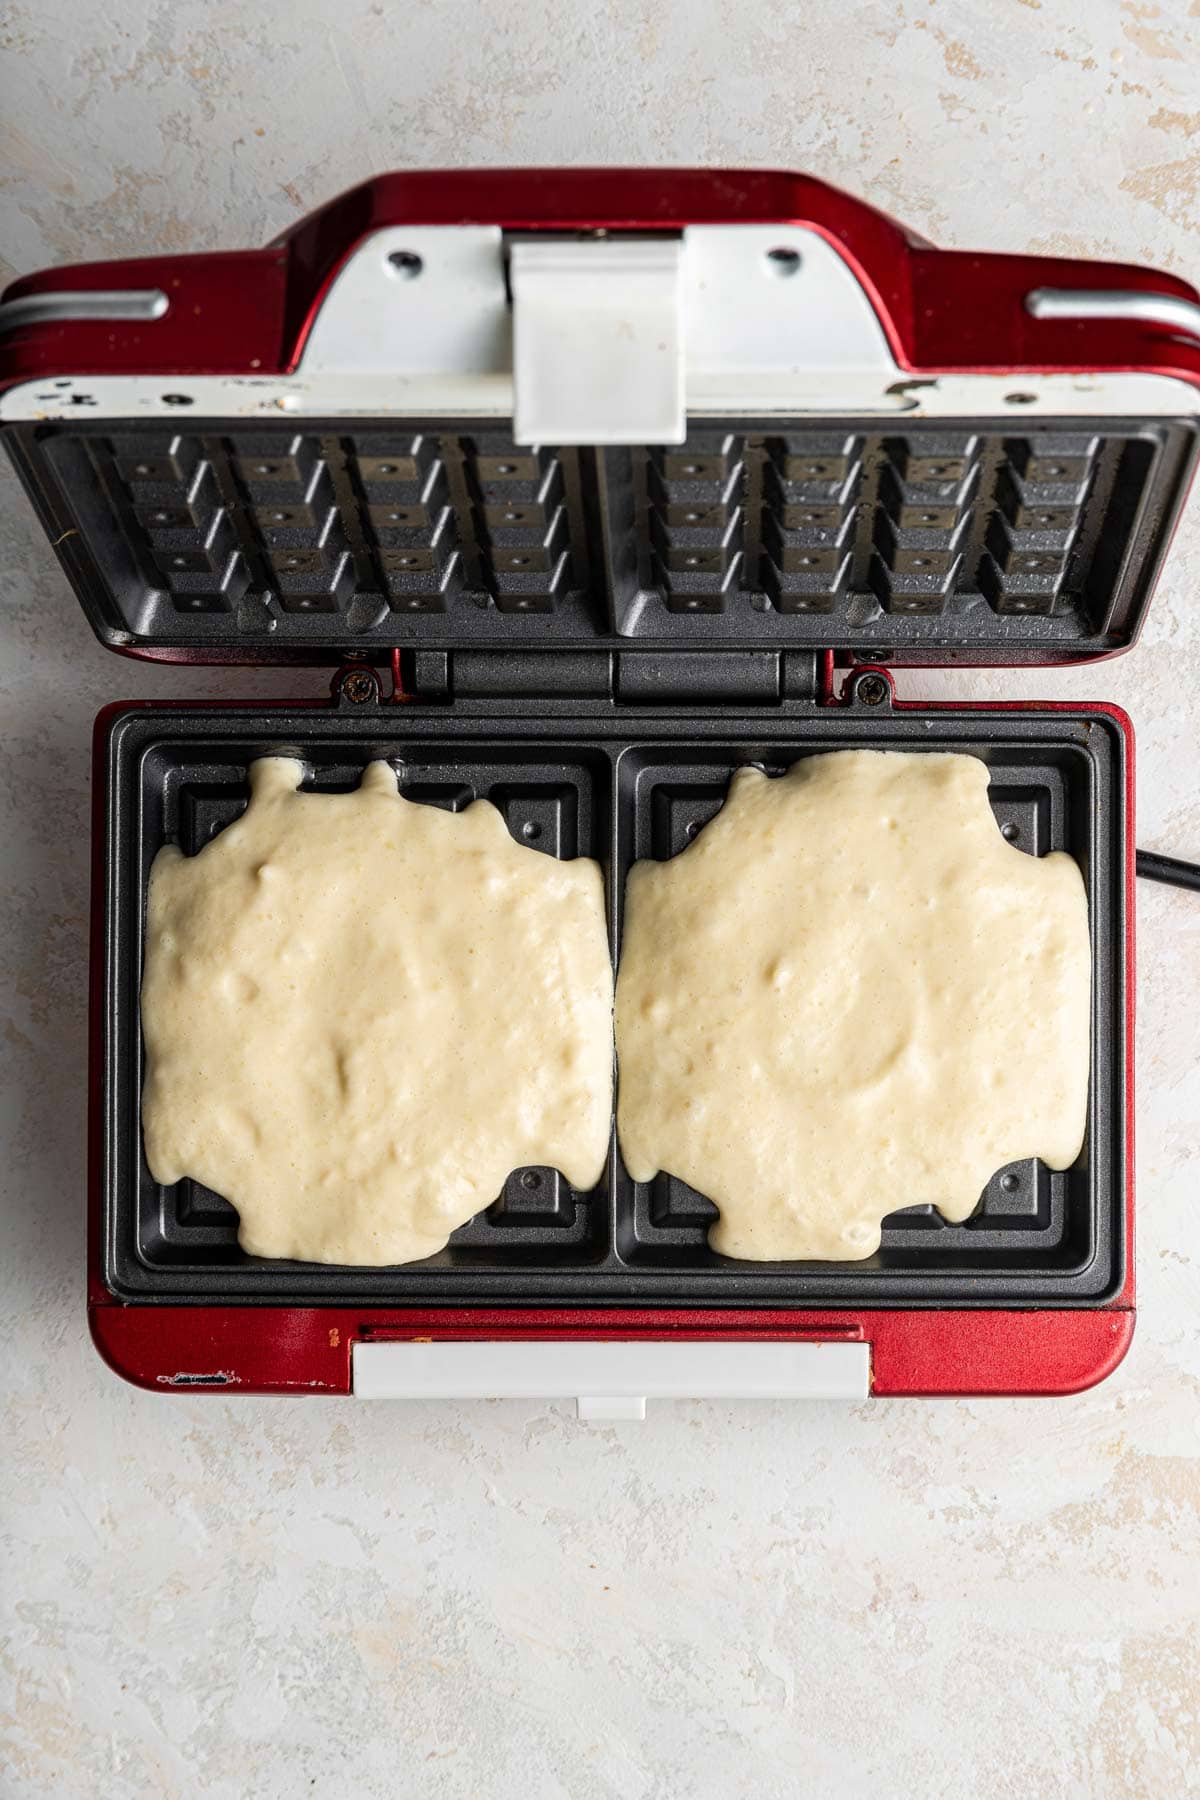 waffle batter poured into a square waffle iron